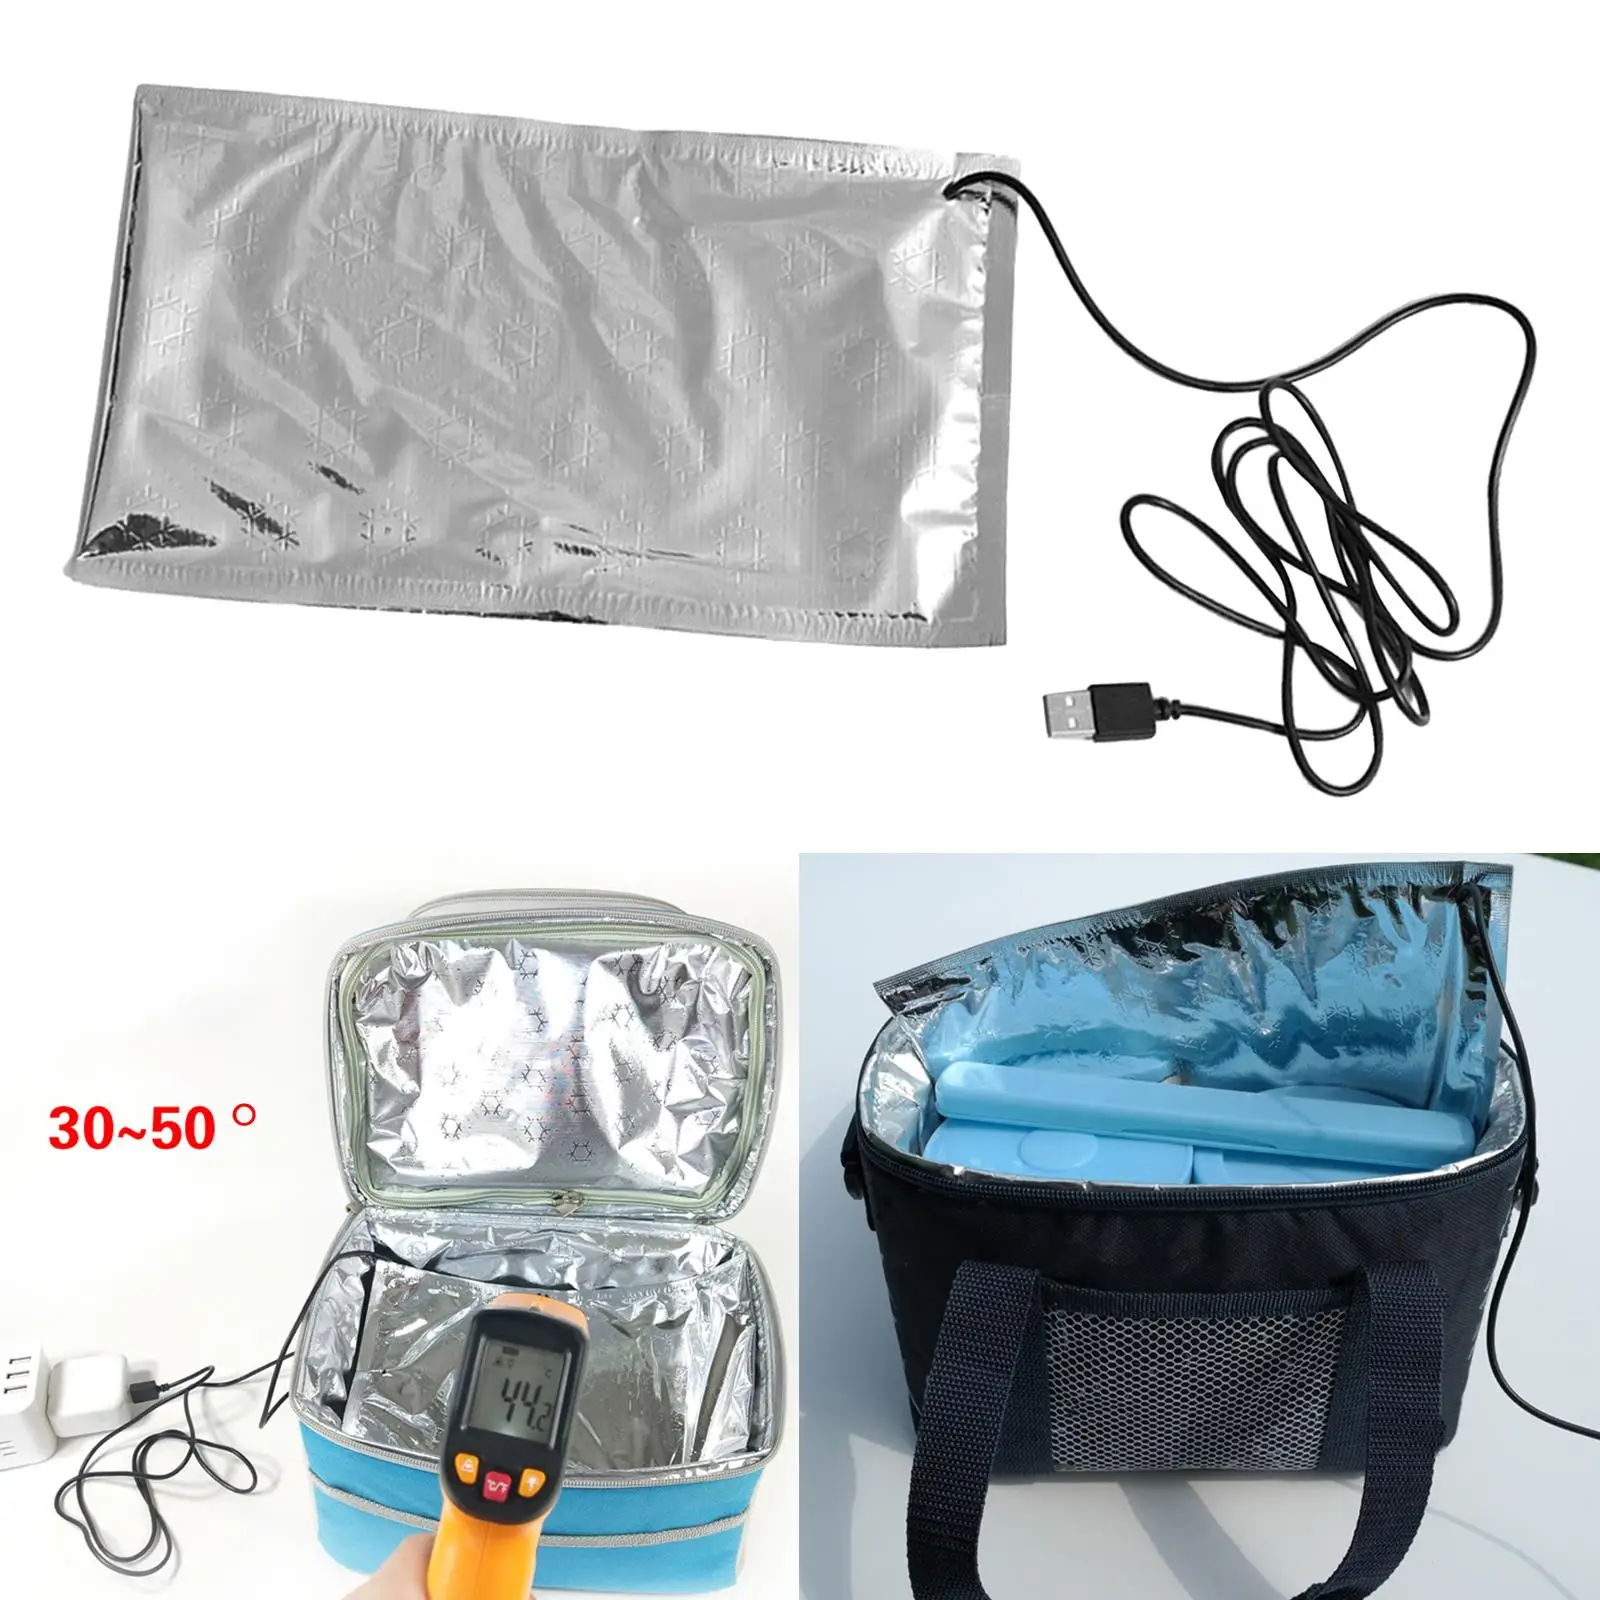 USB Thermostat Outdoor Tool Heating DIY Thermal Heater Pad for Milk Bottle Box